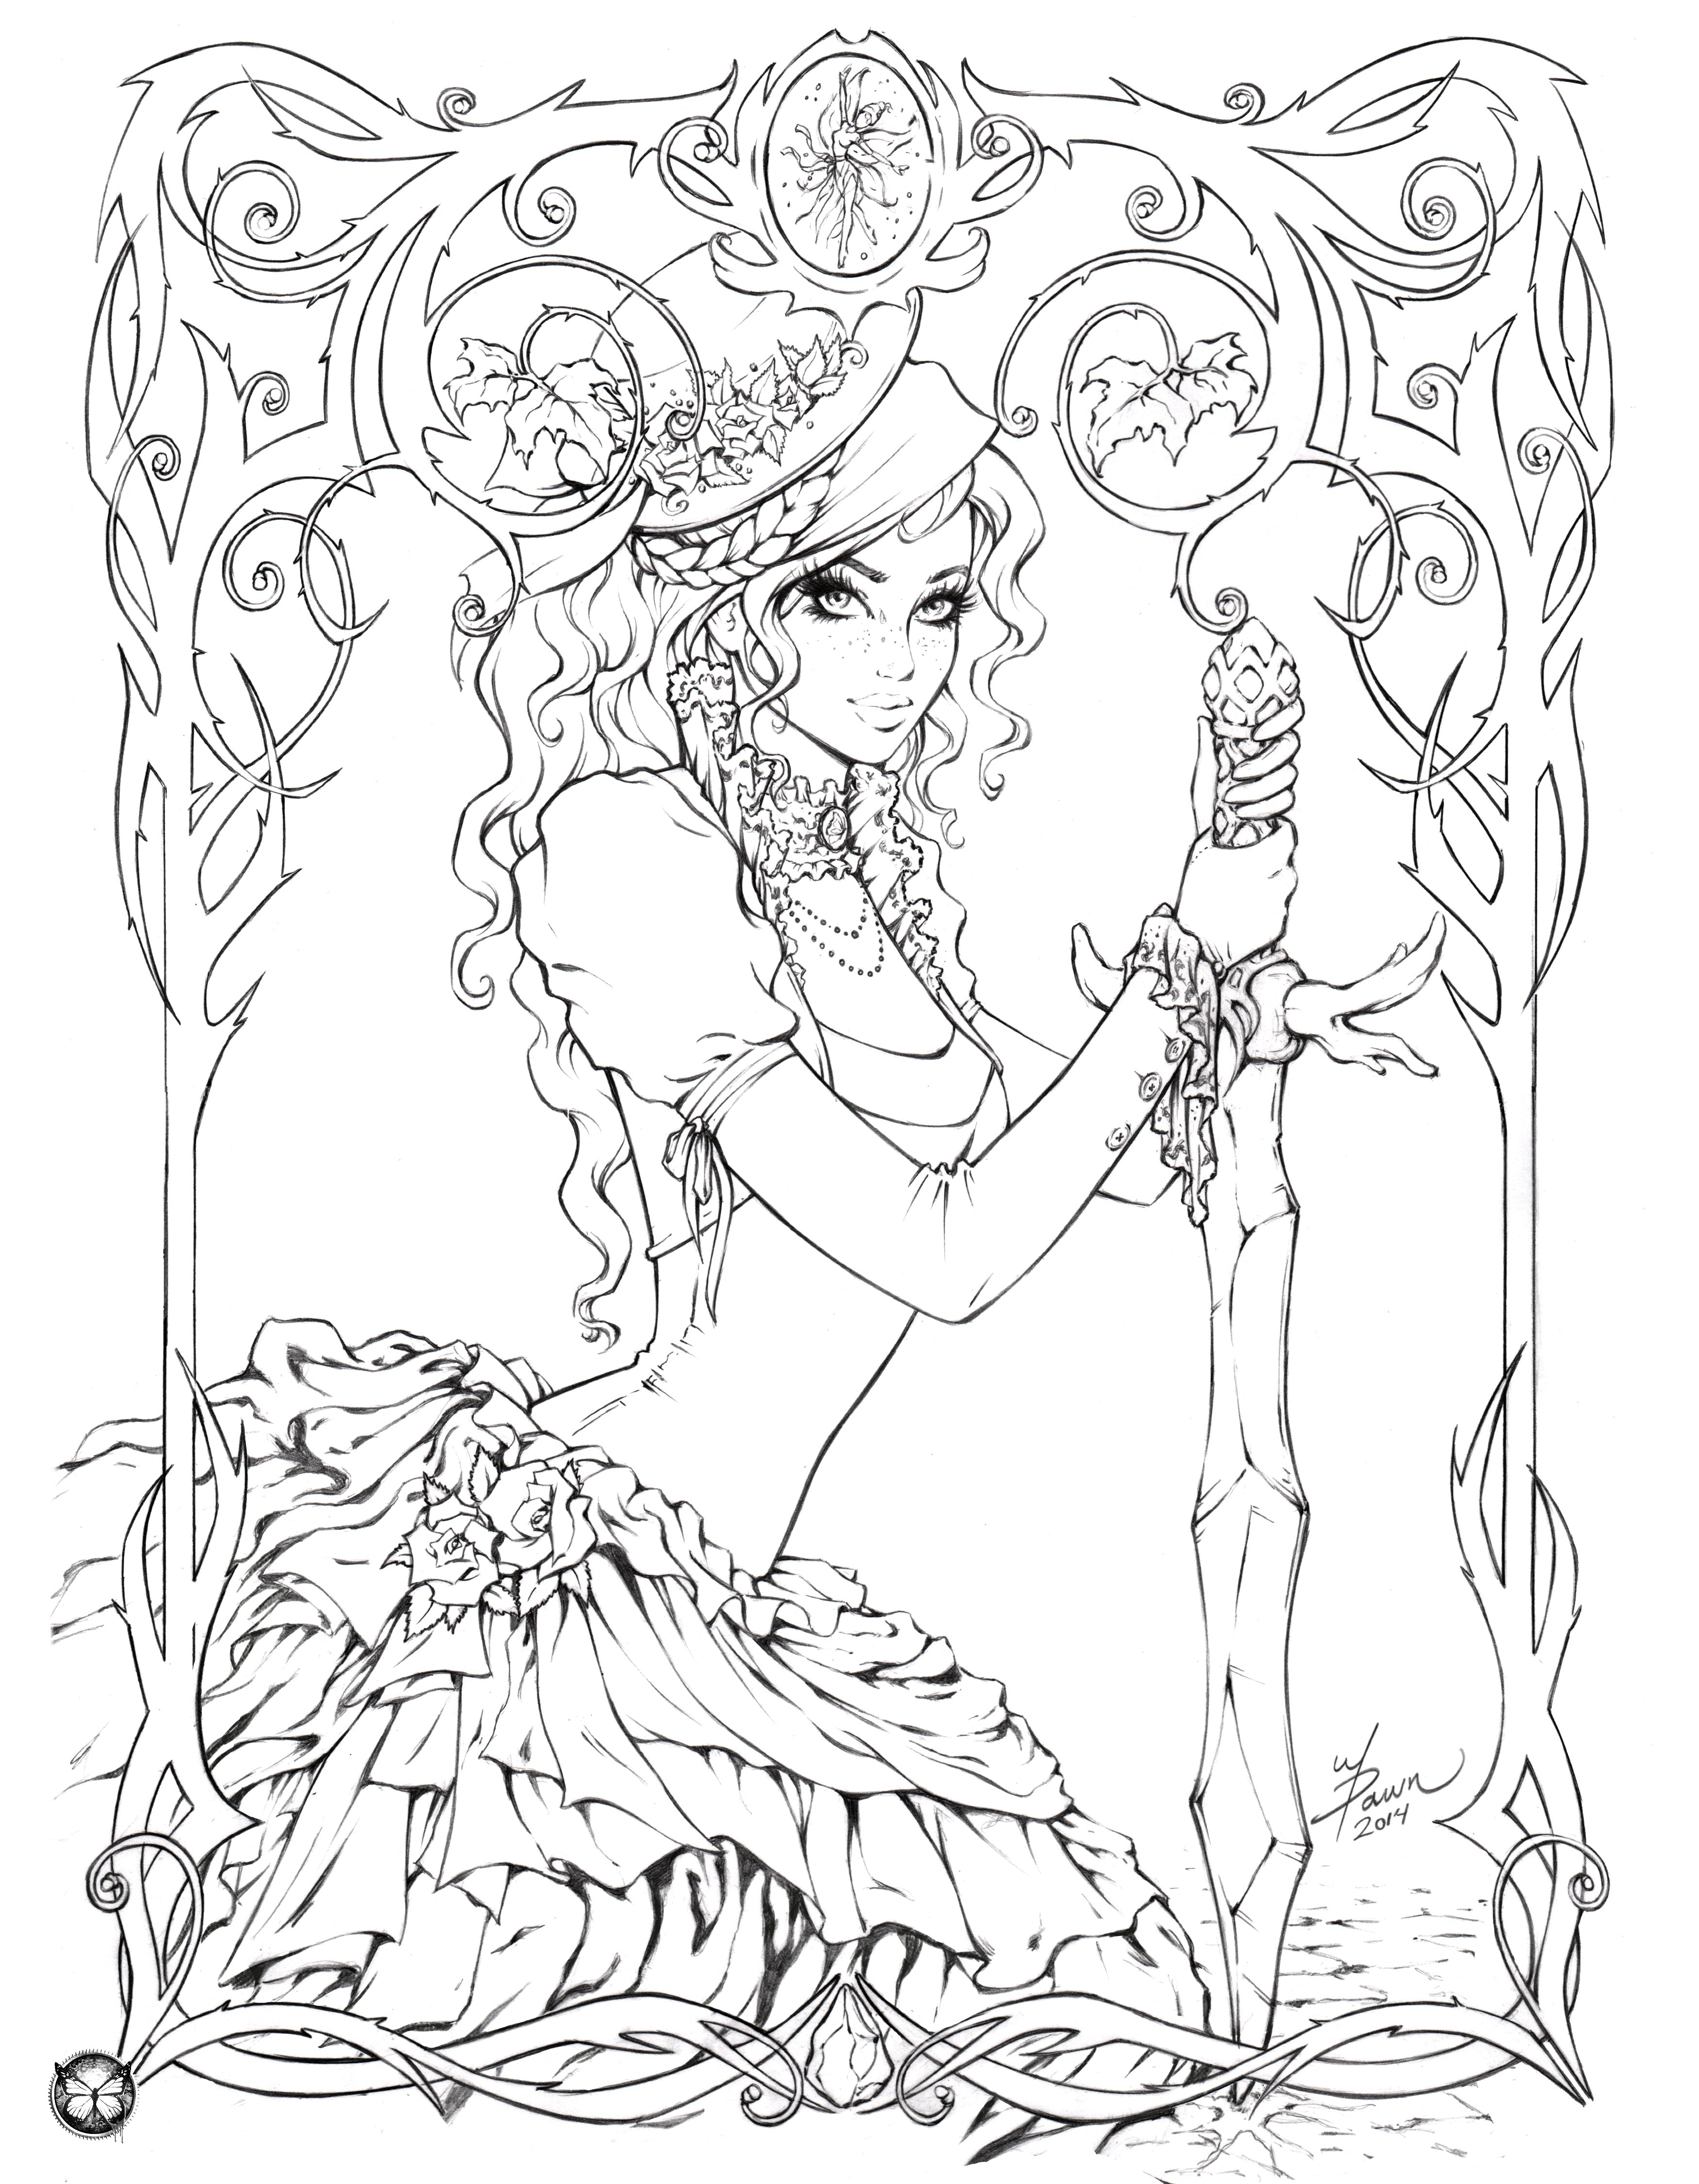 FREE Adult Coloring Pages That Are NOT Boring: 35 Printable Pages